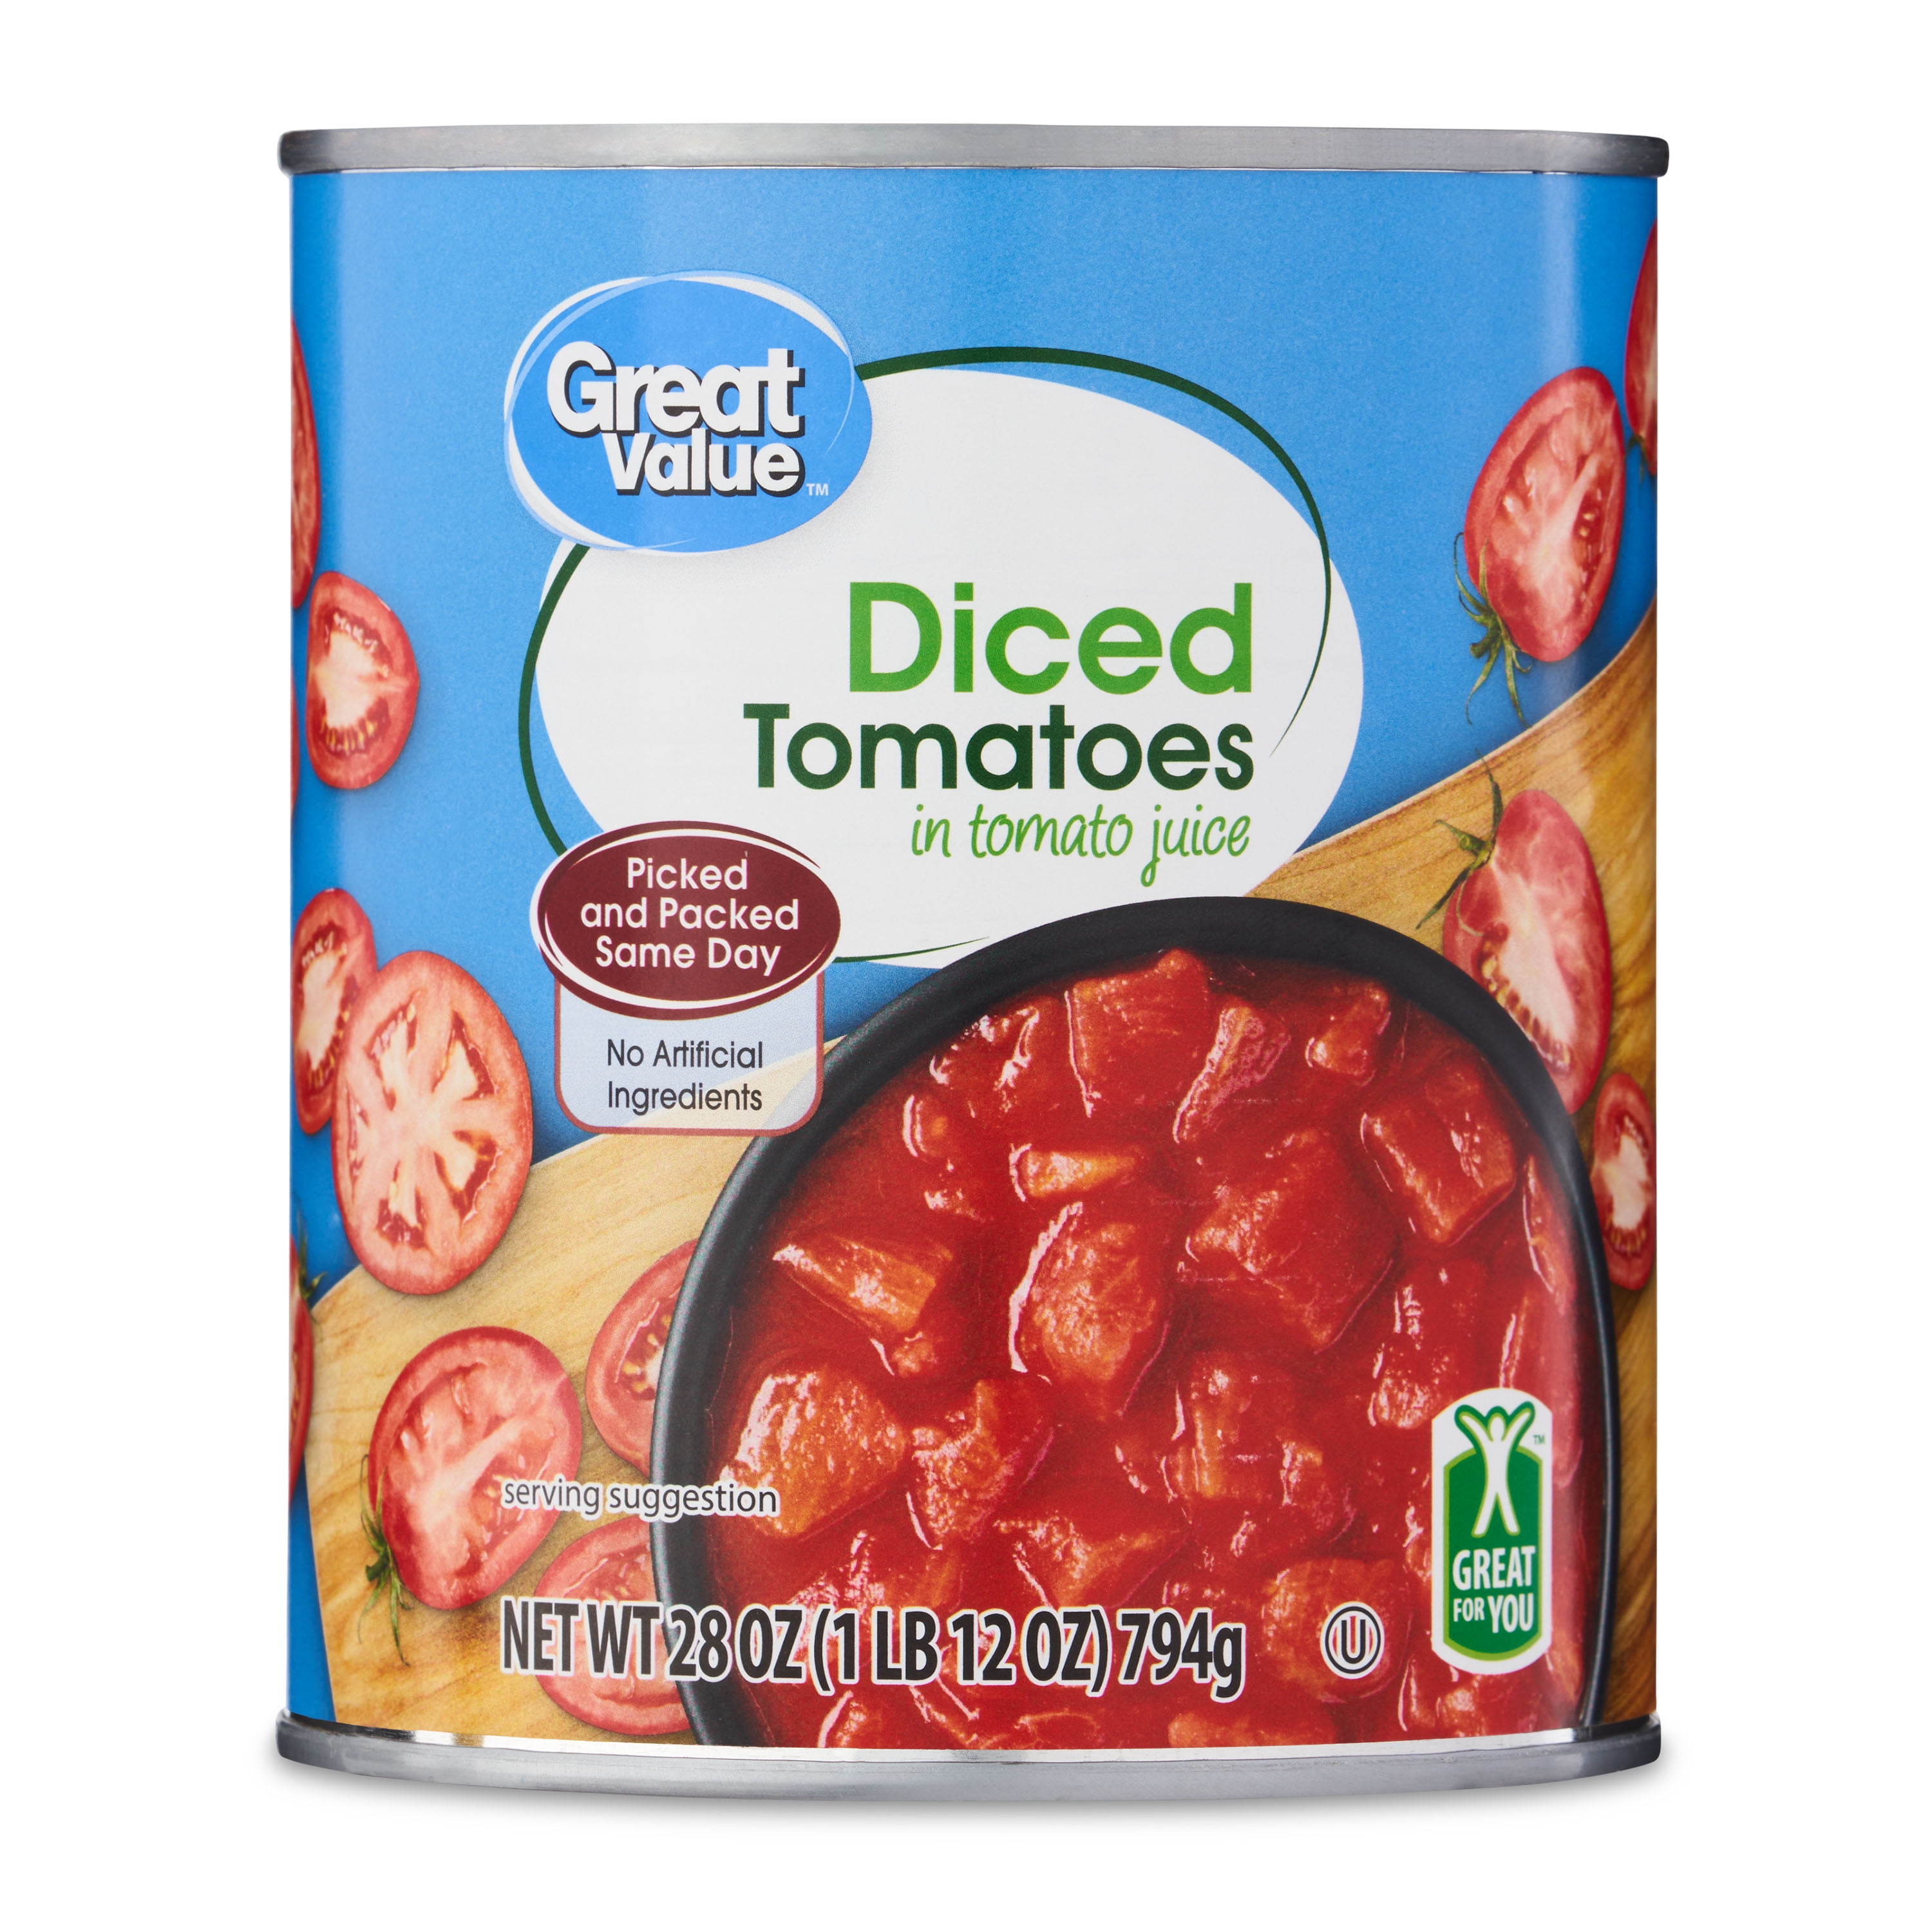 Great Value Diced Tomatoes in Tomato Juice, 28 Oz